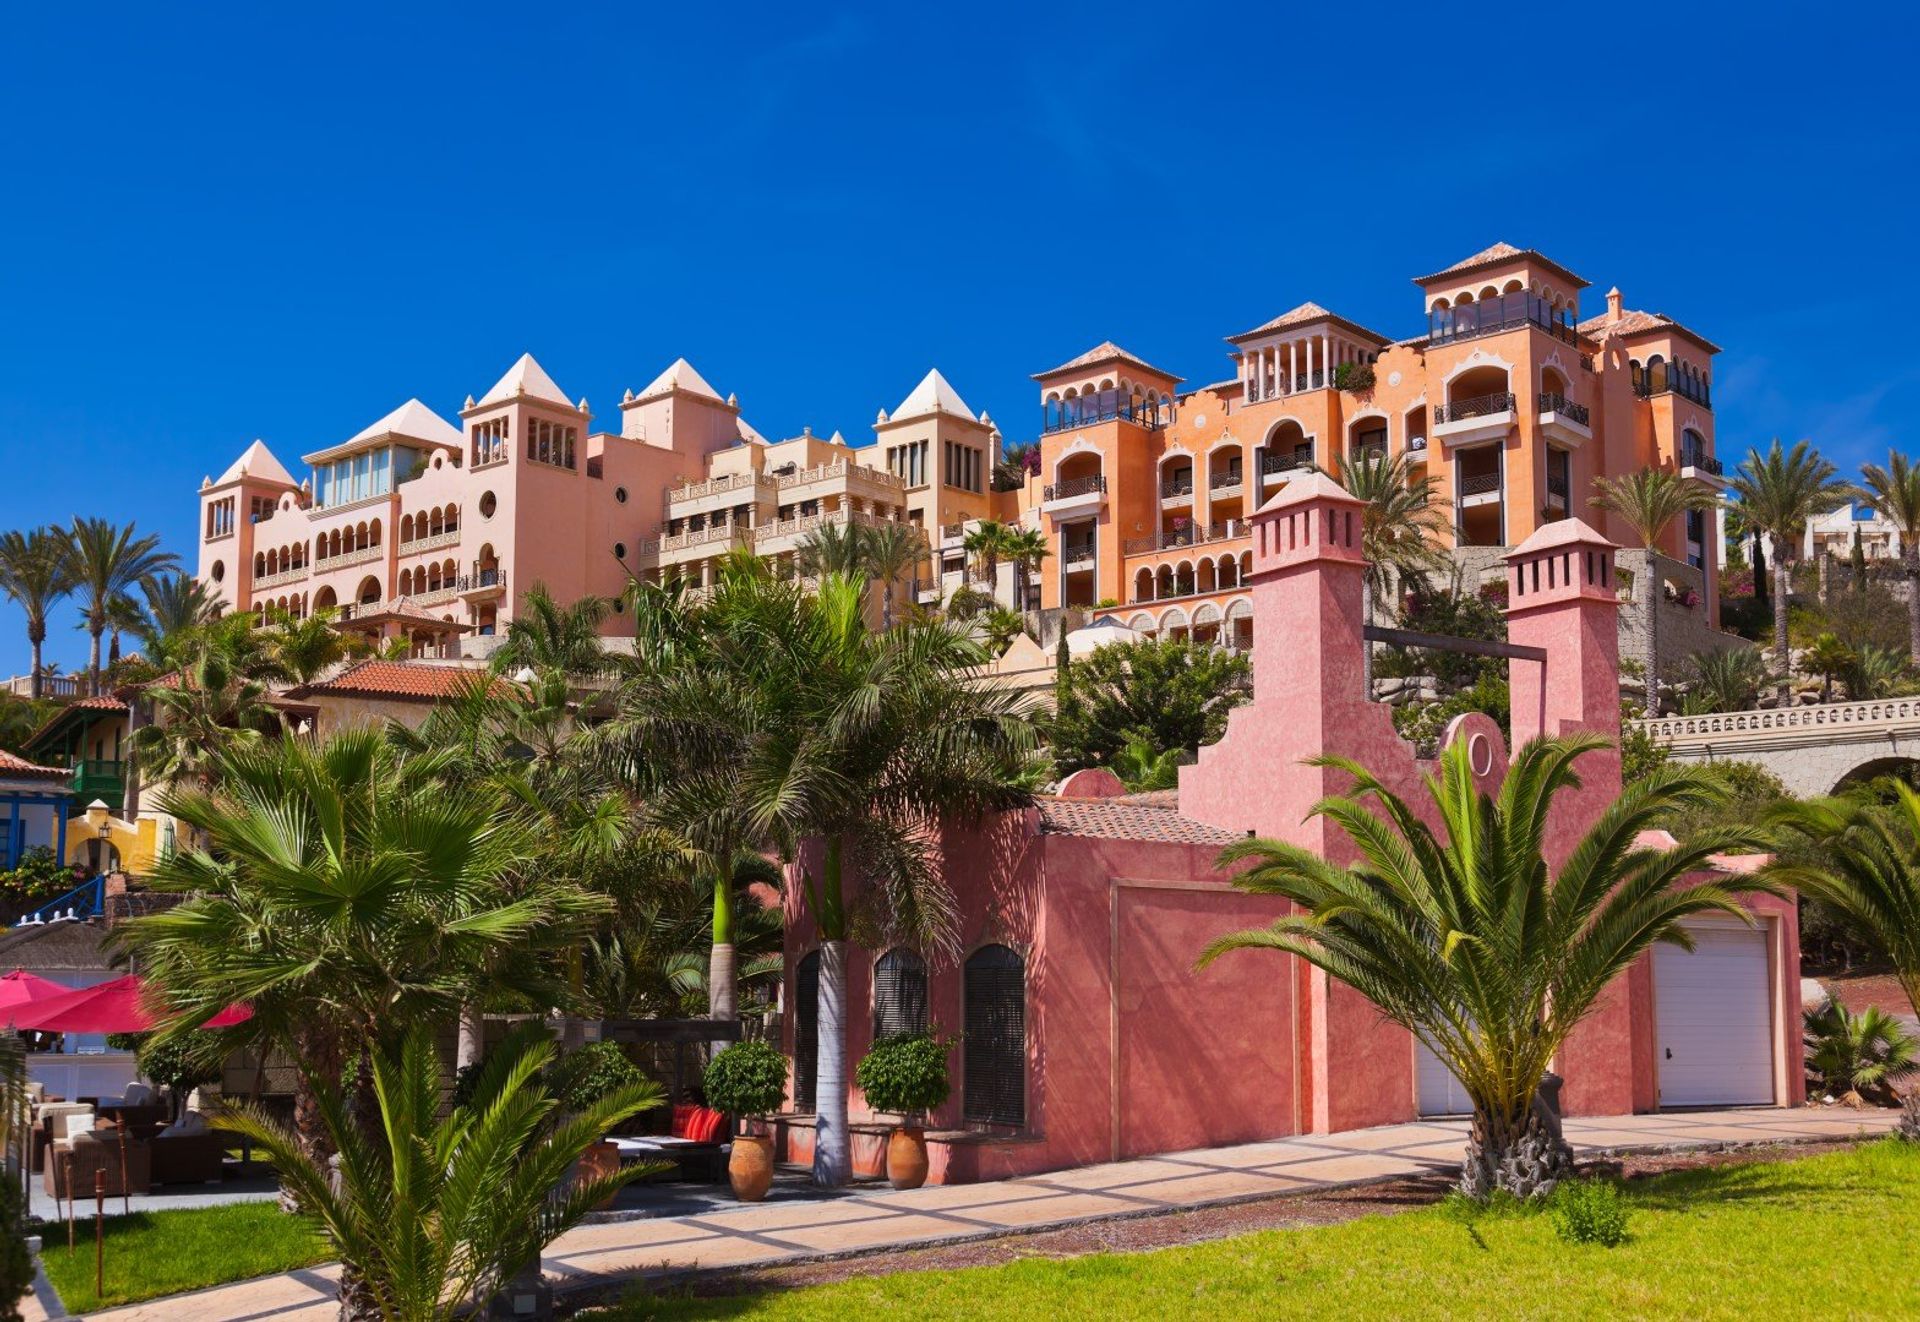 Typical red stone Canarian architecture in Playa de las Americas